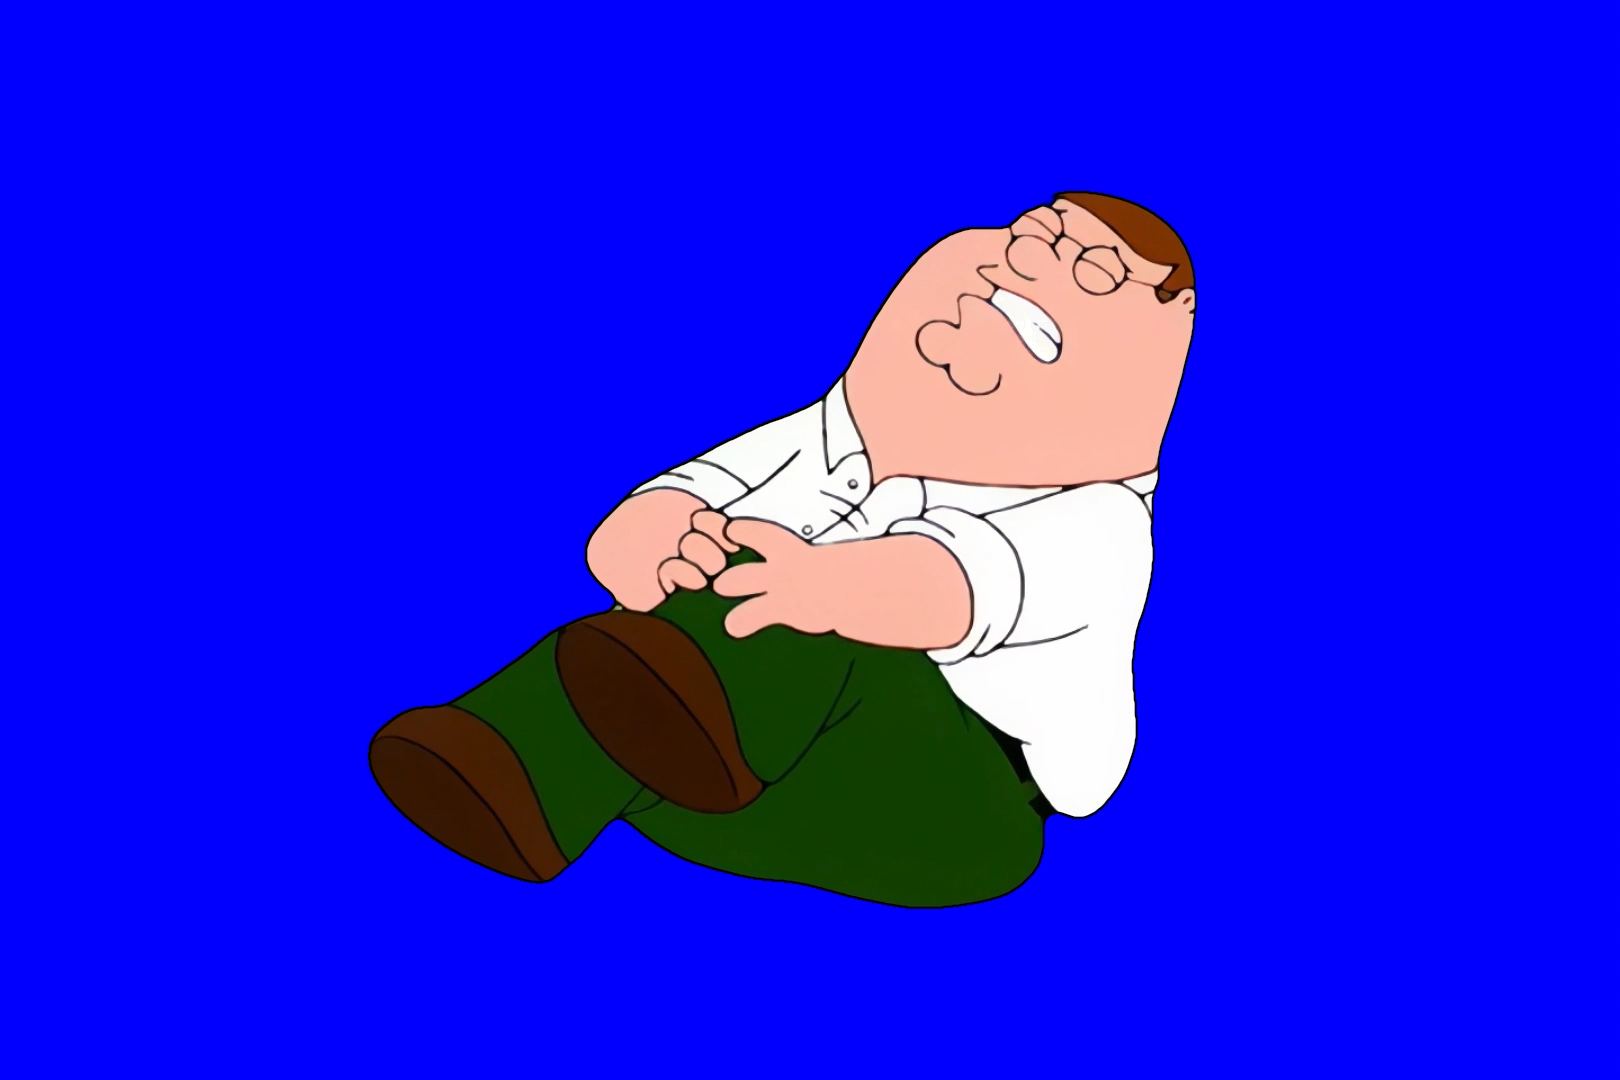 Peter Griffin Hurts His Knee meme - Family Guy (Green Screen) (Blue Screen)